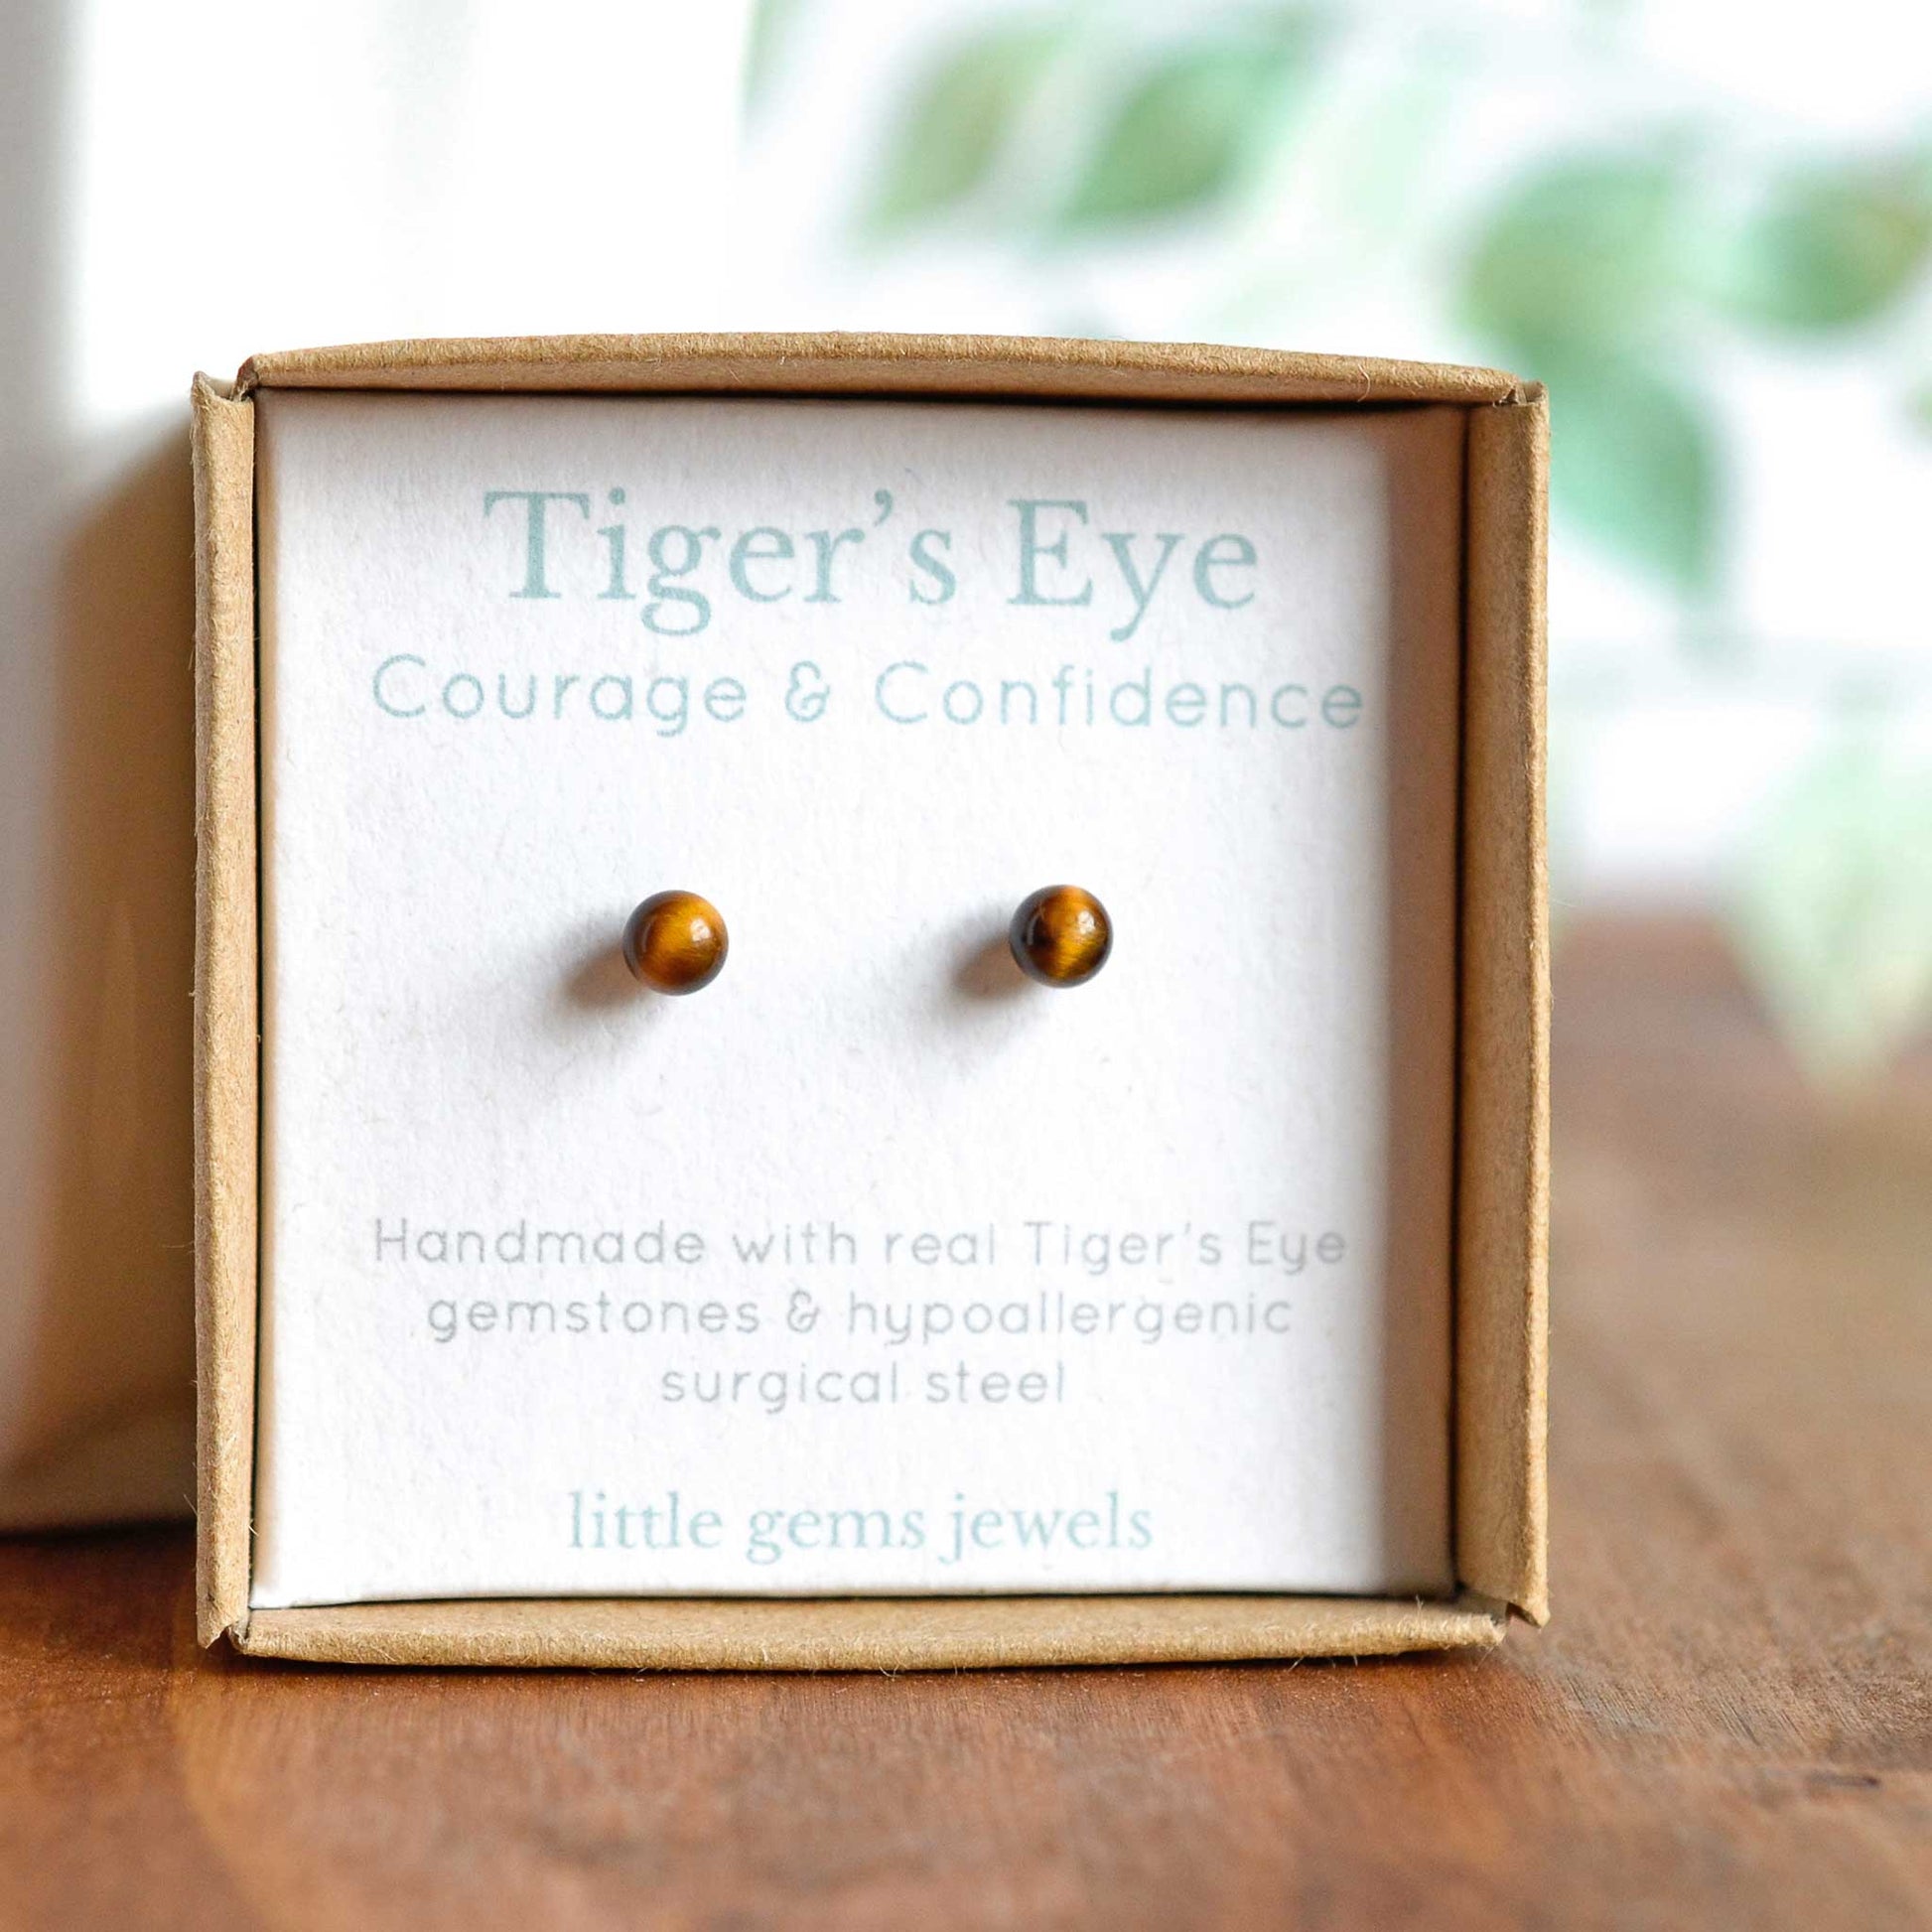 Tigers Eye for courage and confidence gemstone stud earrings in eco friendly gift box